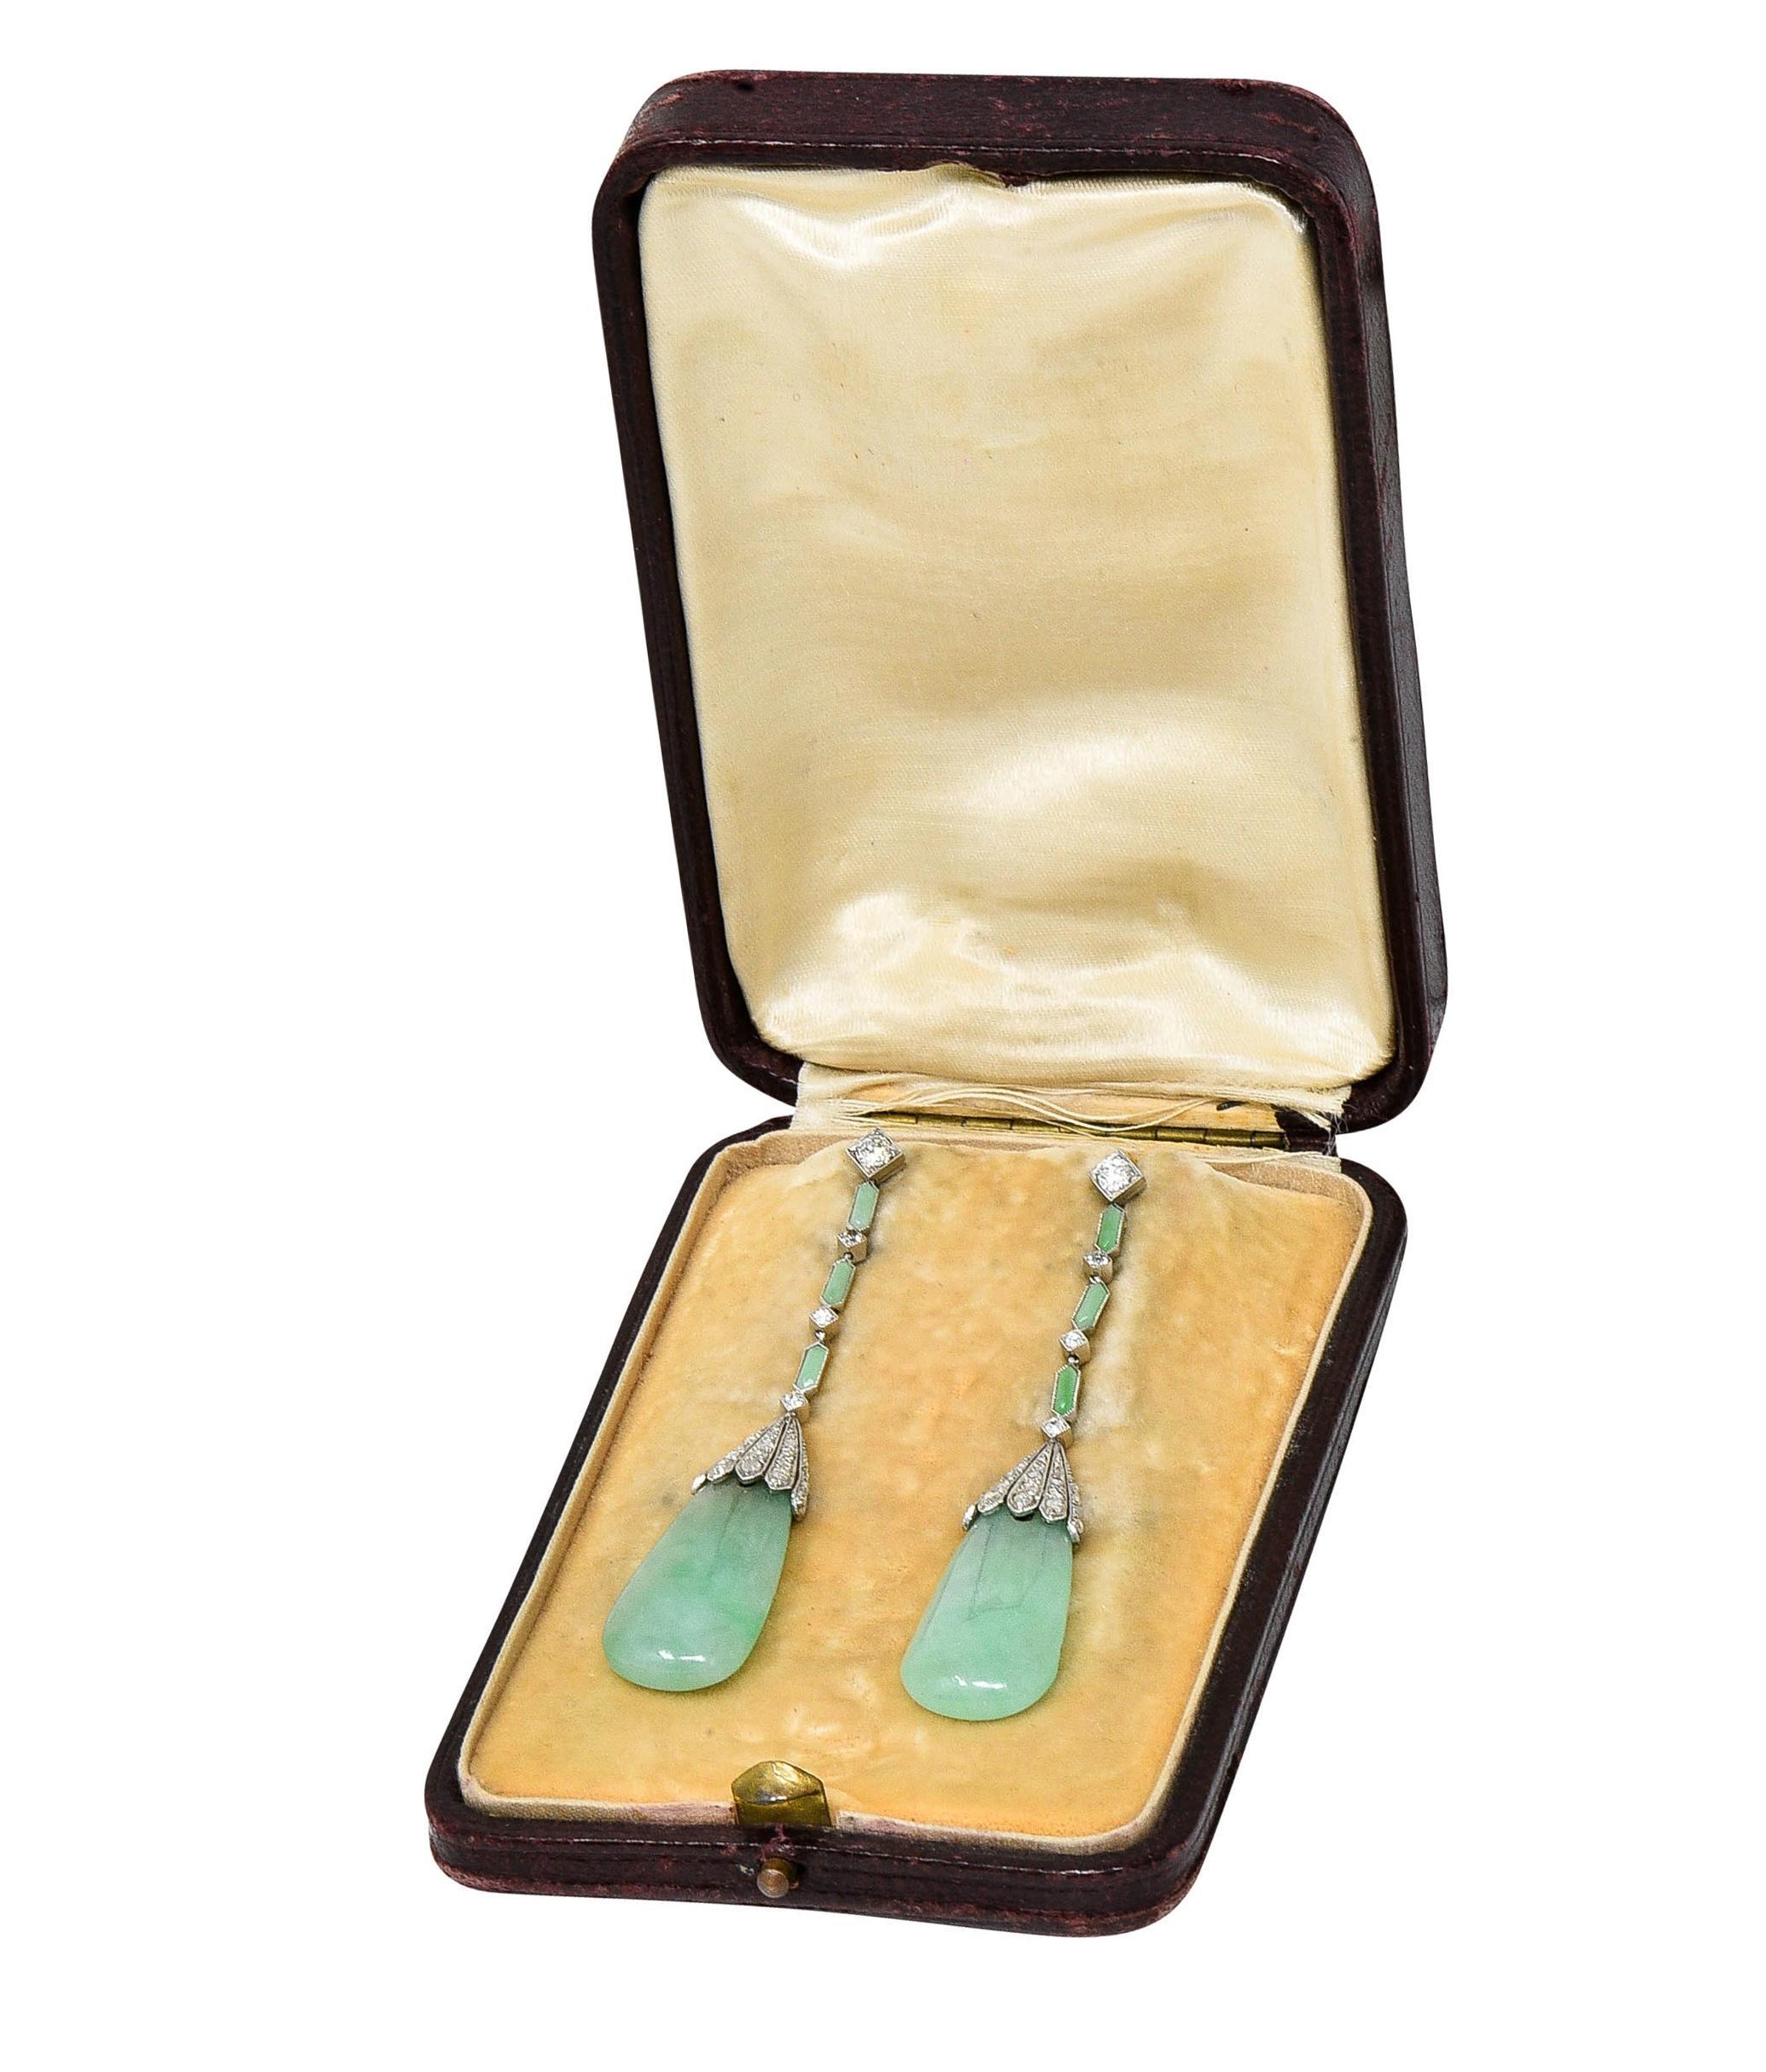 Designed as diamond-shaped surmounts and links featuring carved jade links and drops 
Links feature bezel set carved hexagonal-shaped jade plaques measuring 6.2 x 2.2 mm
Drops are wide teardrop shaped and measure 15.0 x 28.0 mm - drill set in